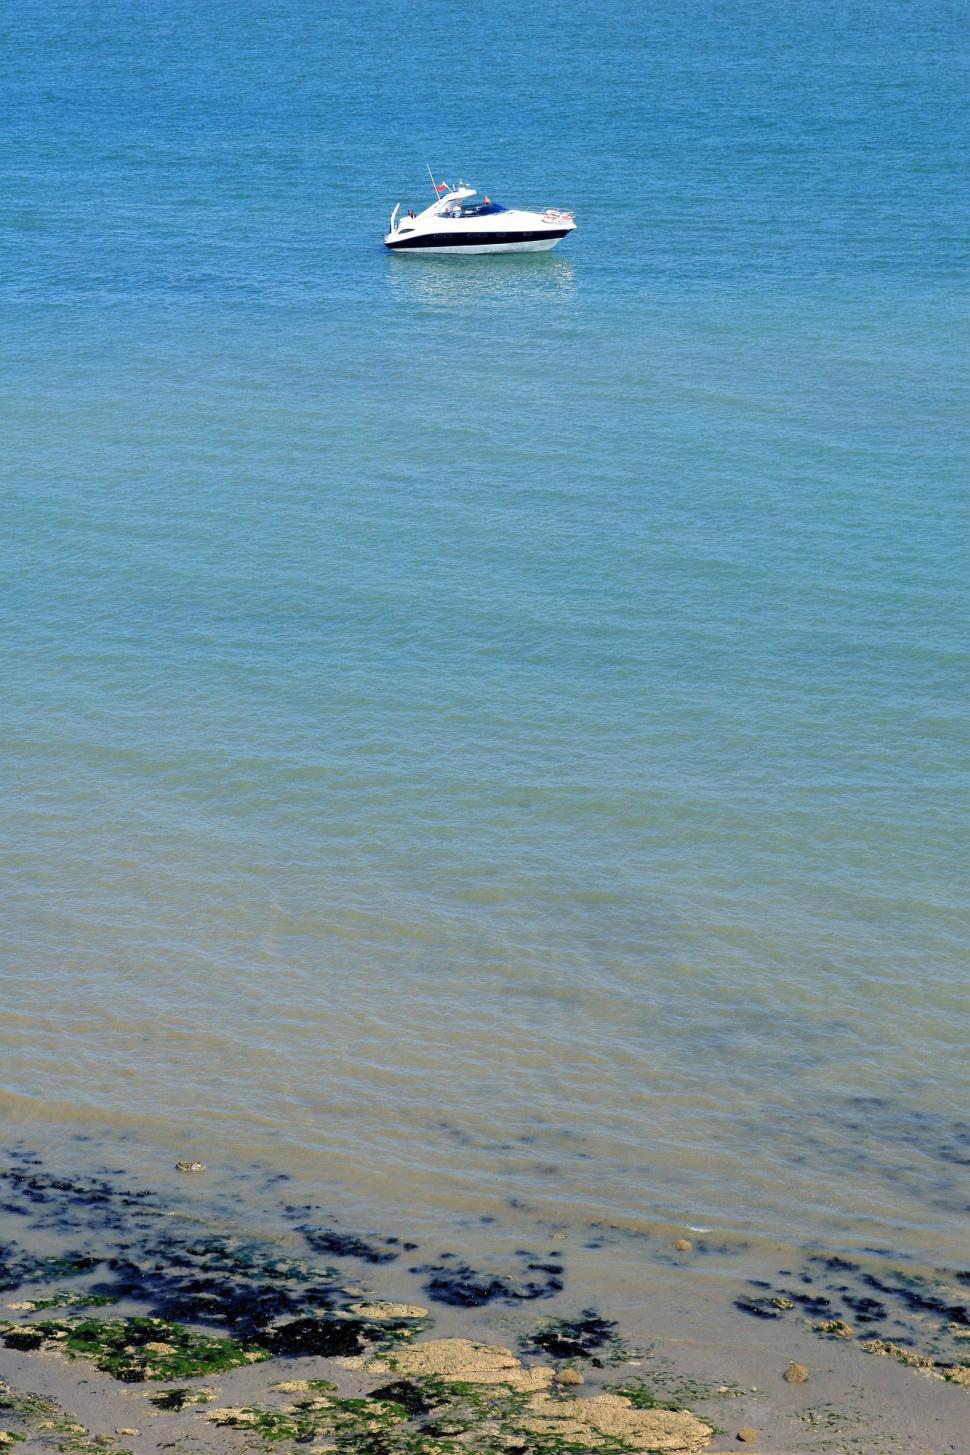 Free Image of Boat Sailing in Water on Sunny Day 